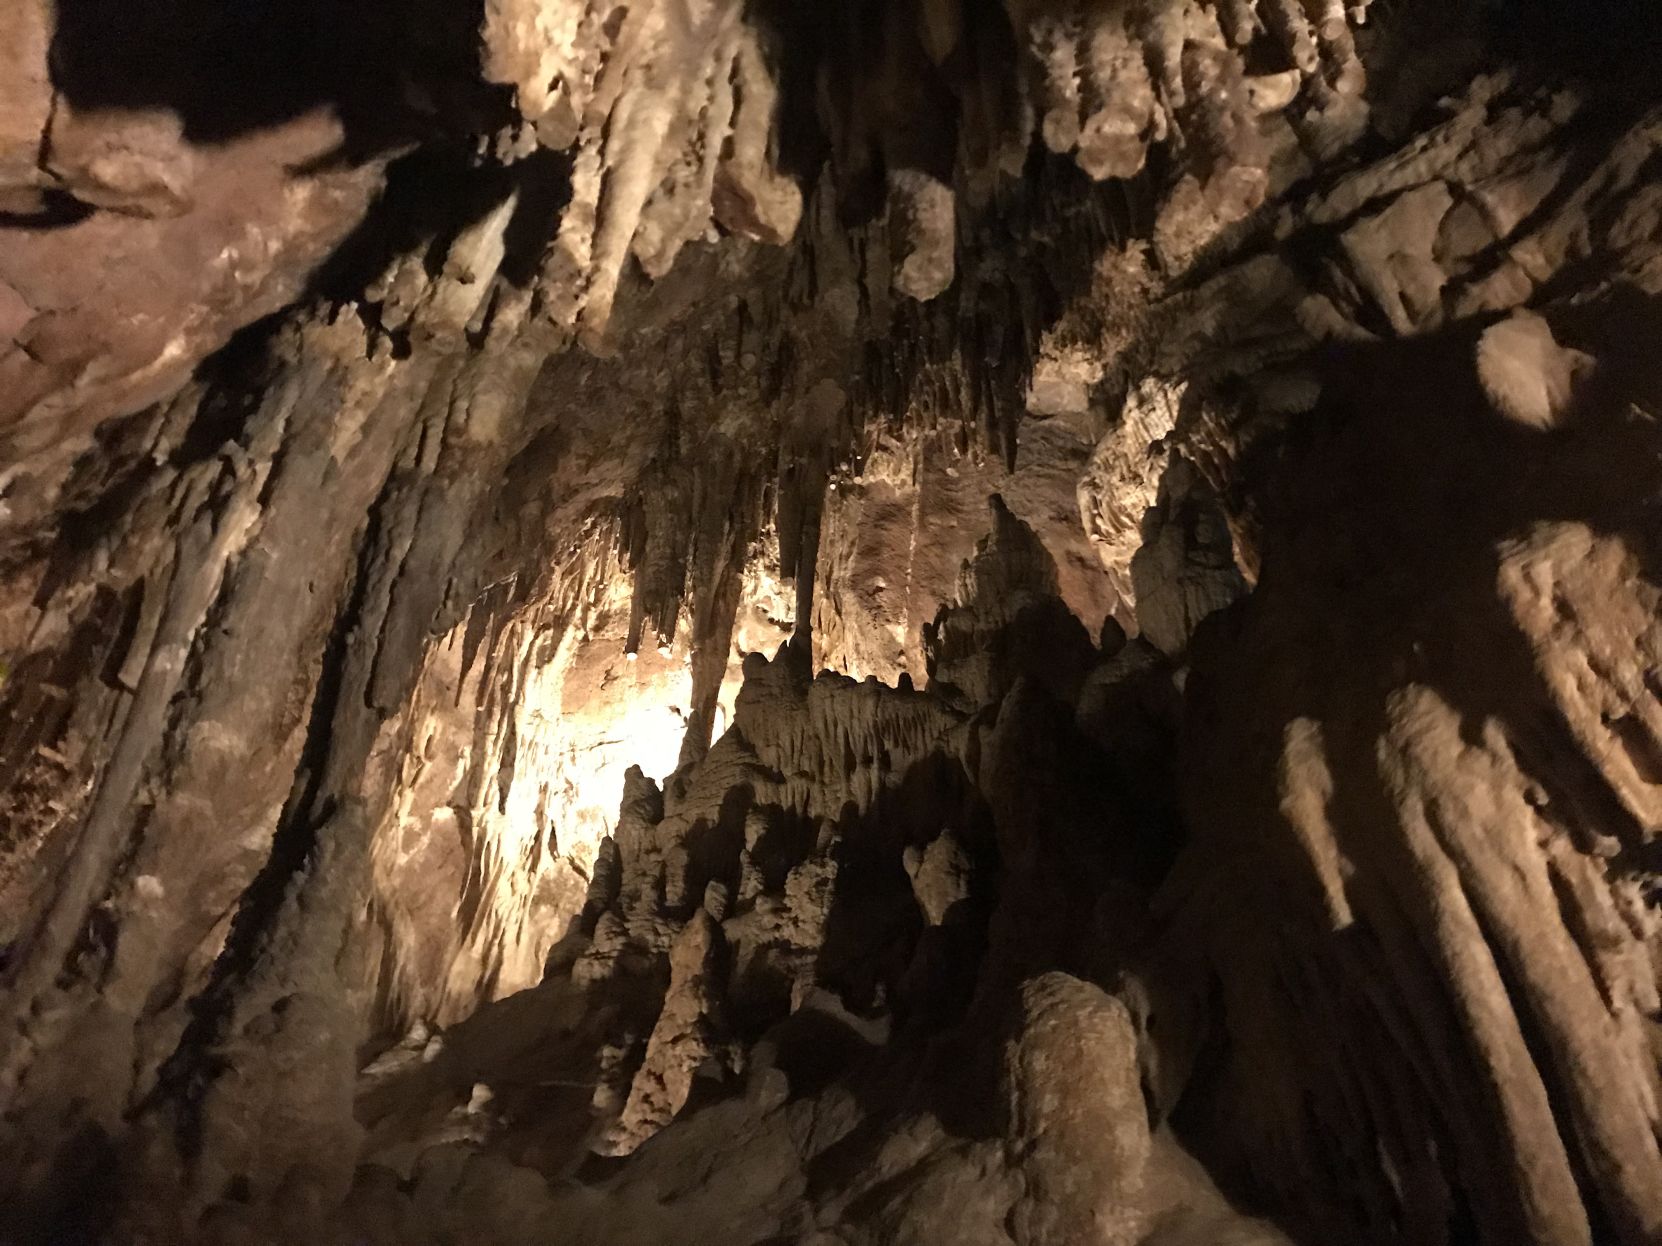 colossal cave history